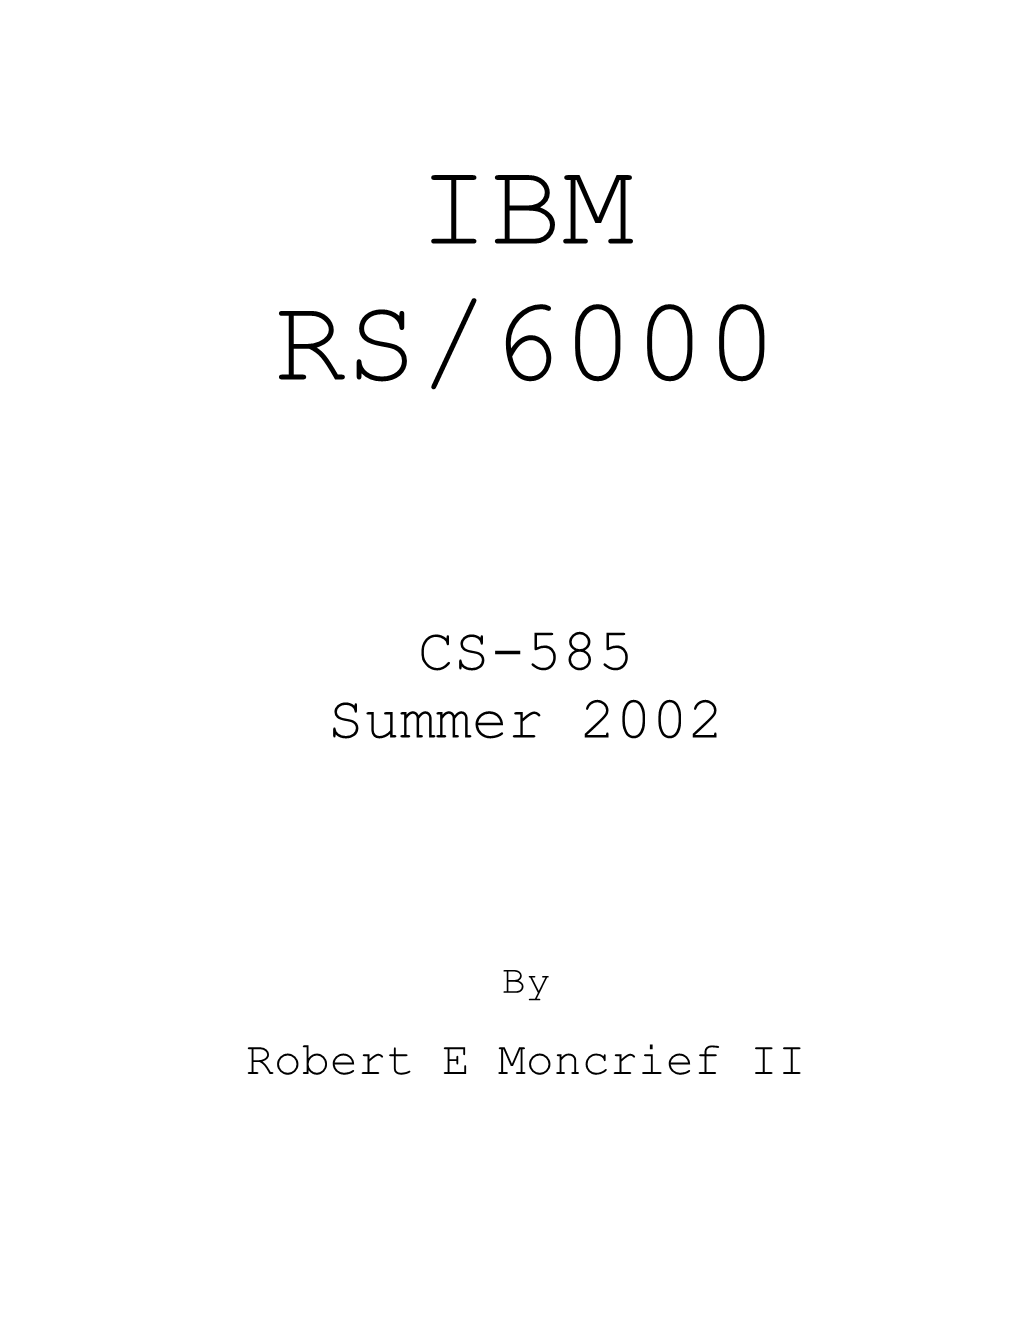 History of the IBM RS/6000